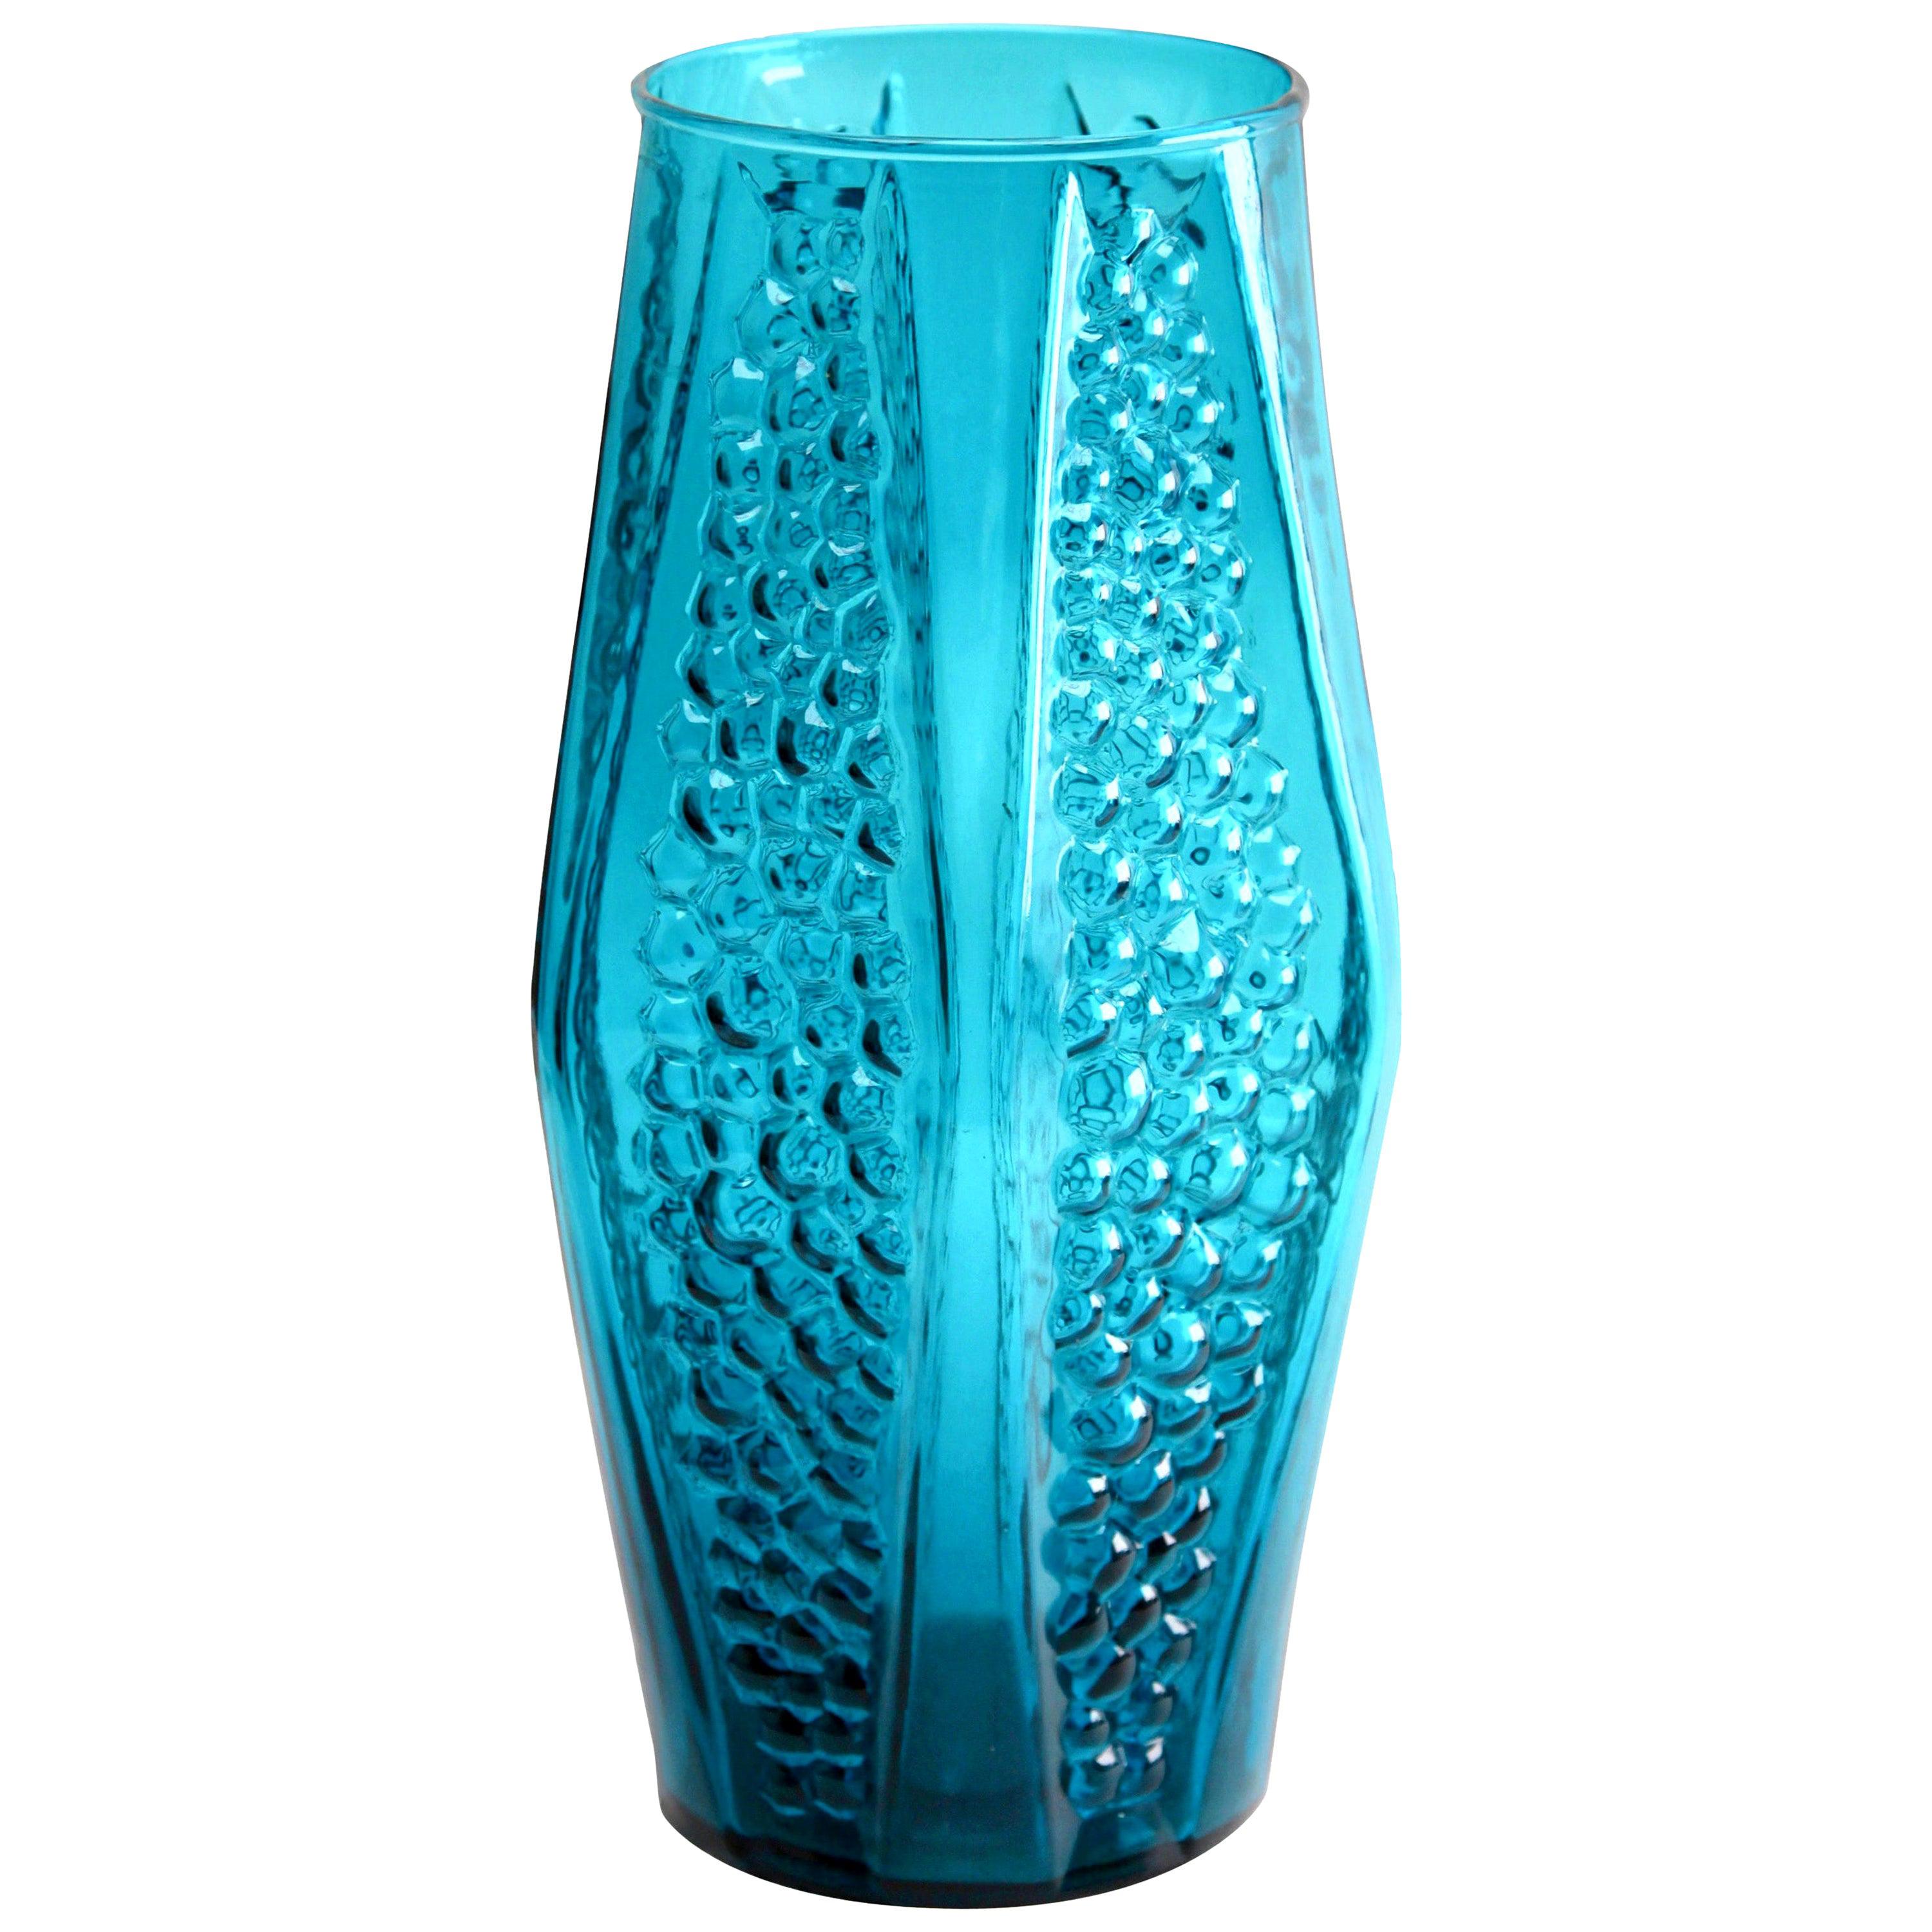 Stolle-Nieman 'Attributed' Hexagonal Vase with Bubbled Texture, 1970s